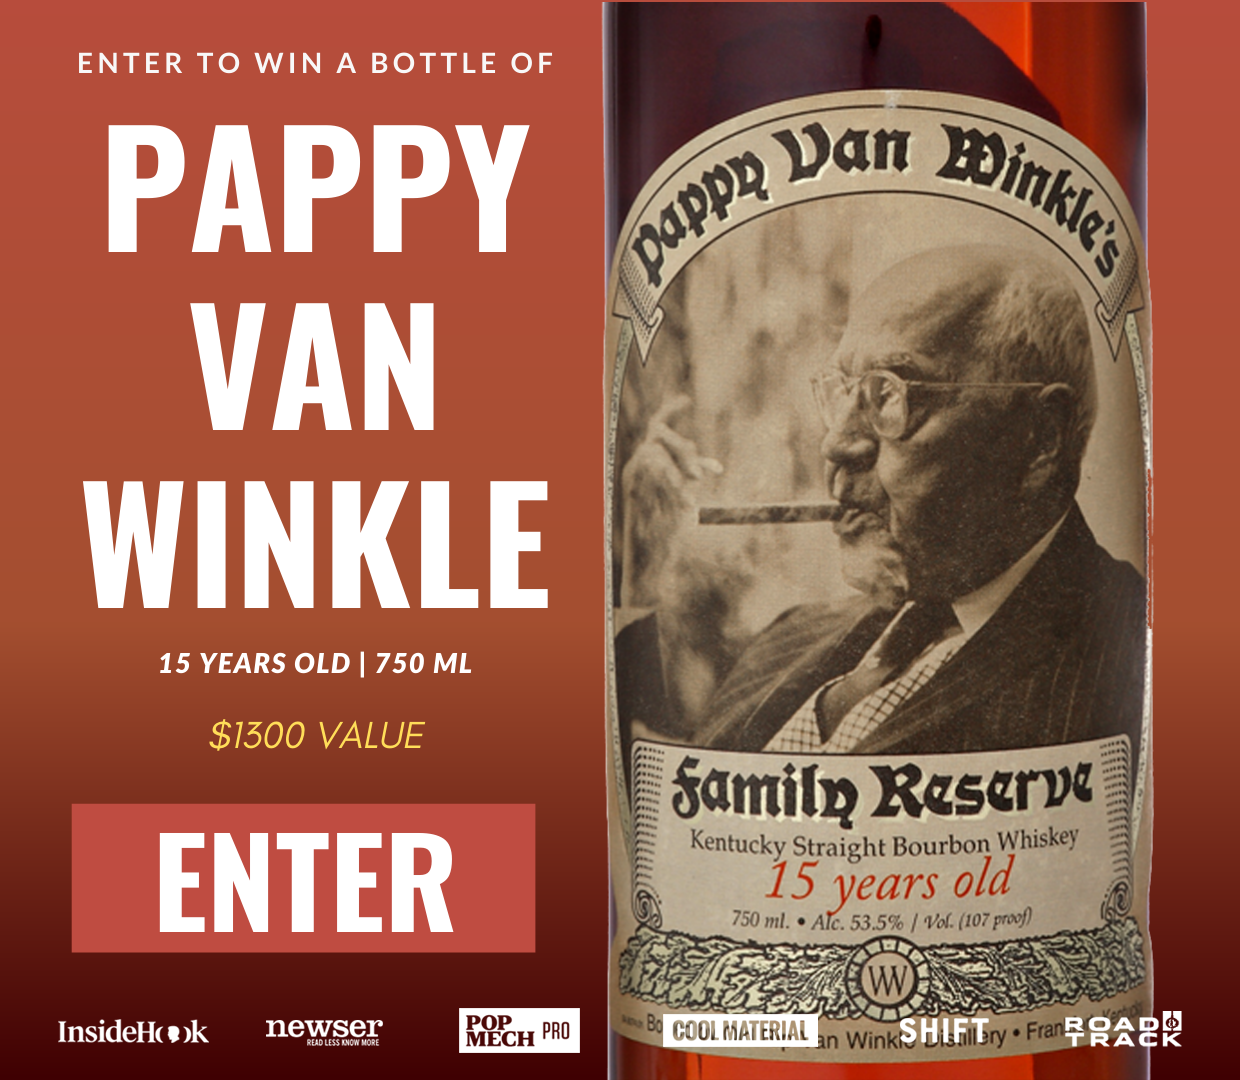 Win a Bottle of Pappy Van Winkle (2015 Family Reserve, 15-Year Old Bourbon, 750 ml) Valued at $1300. Enter now! Must be 21+ and a US resident to enter.